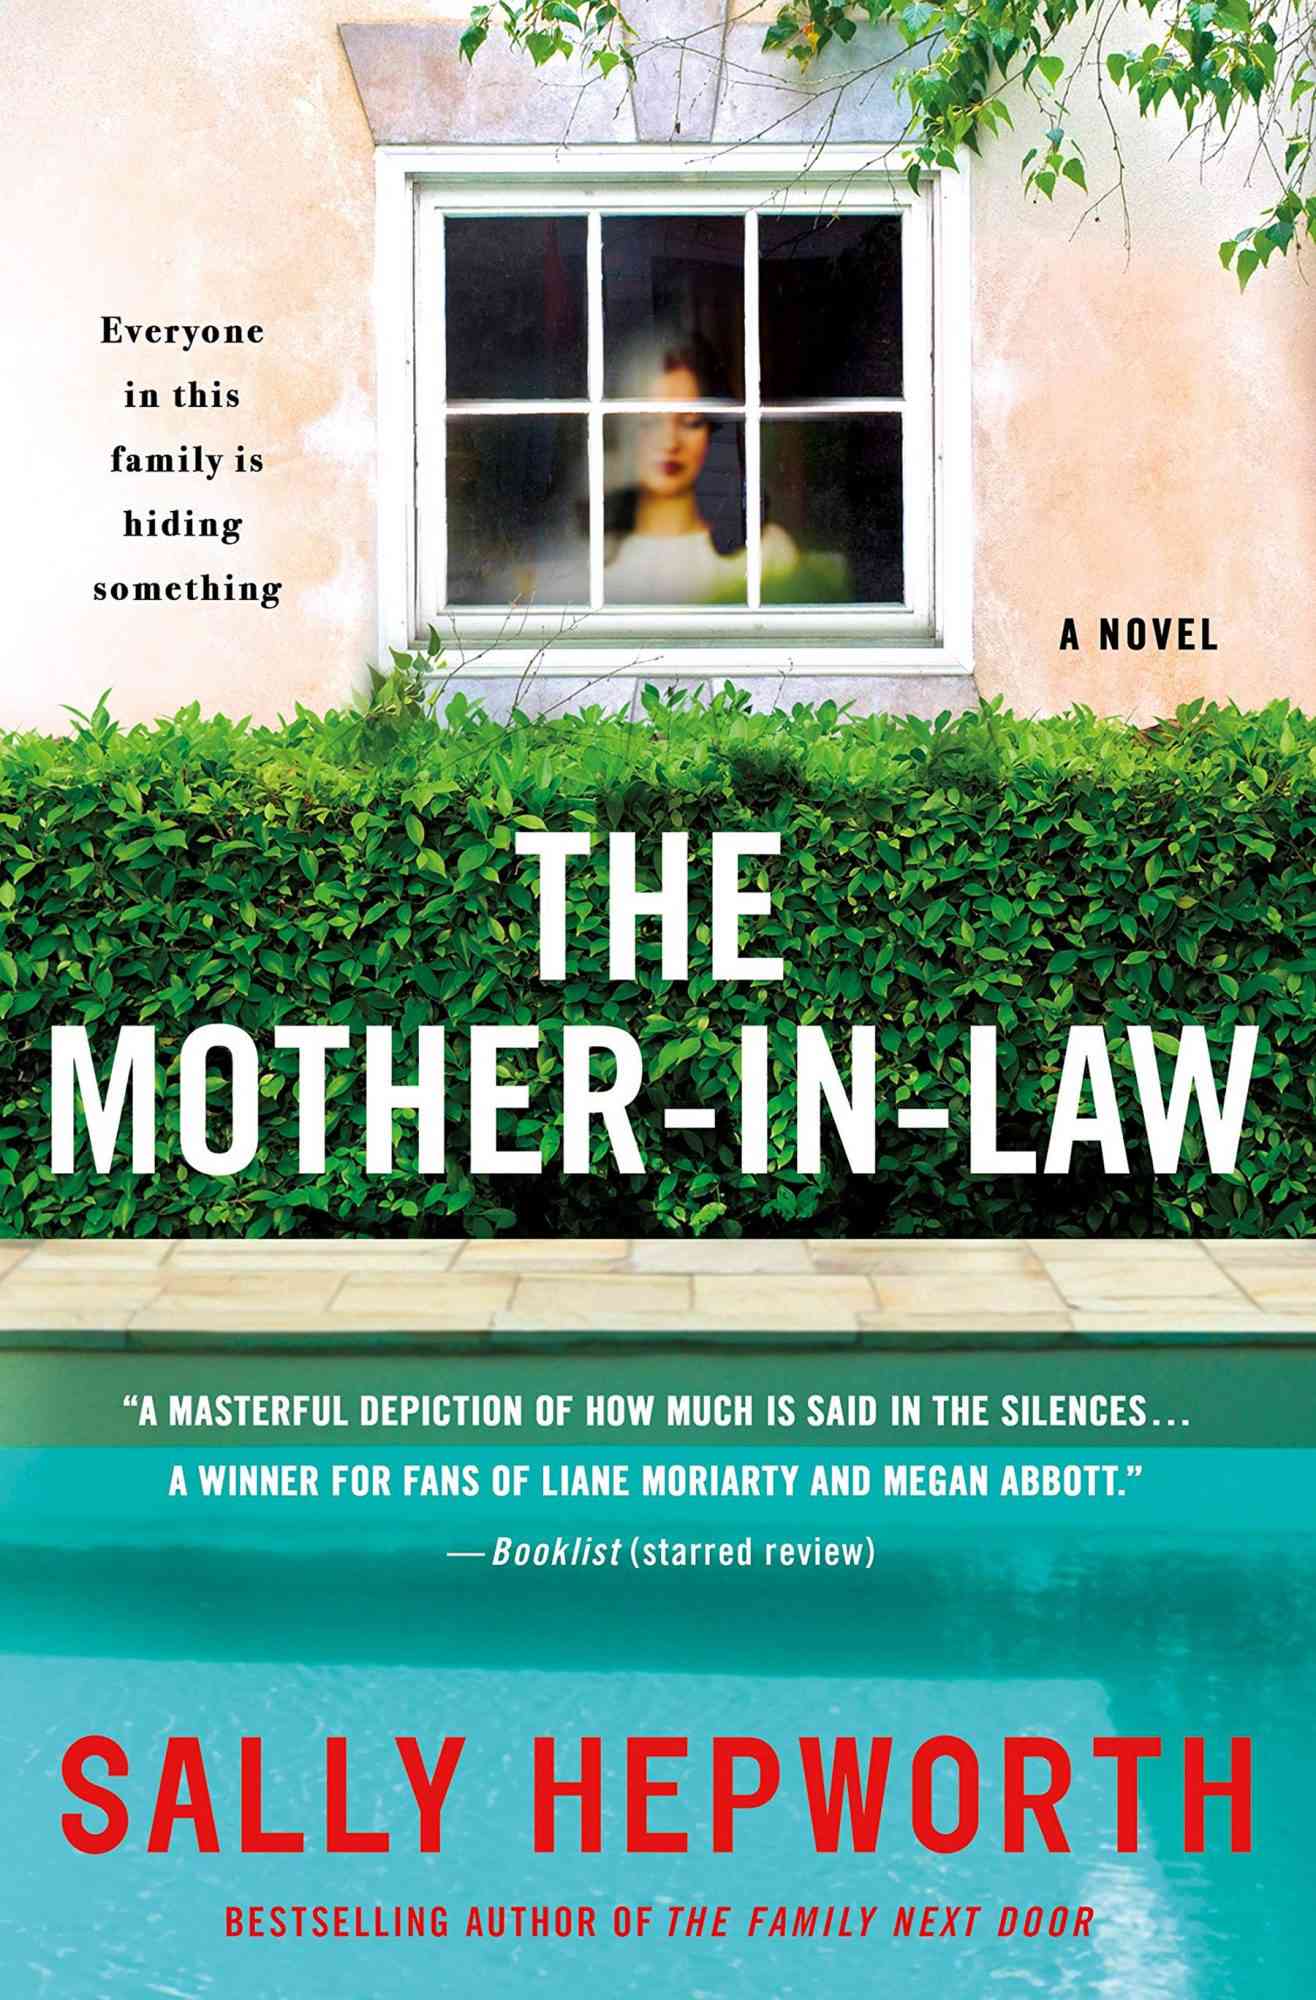 The Mother-in-Law, by Sally Hepworth